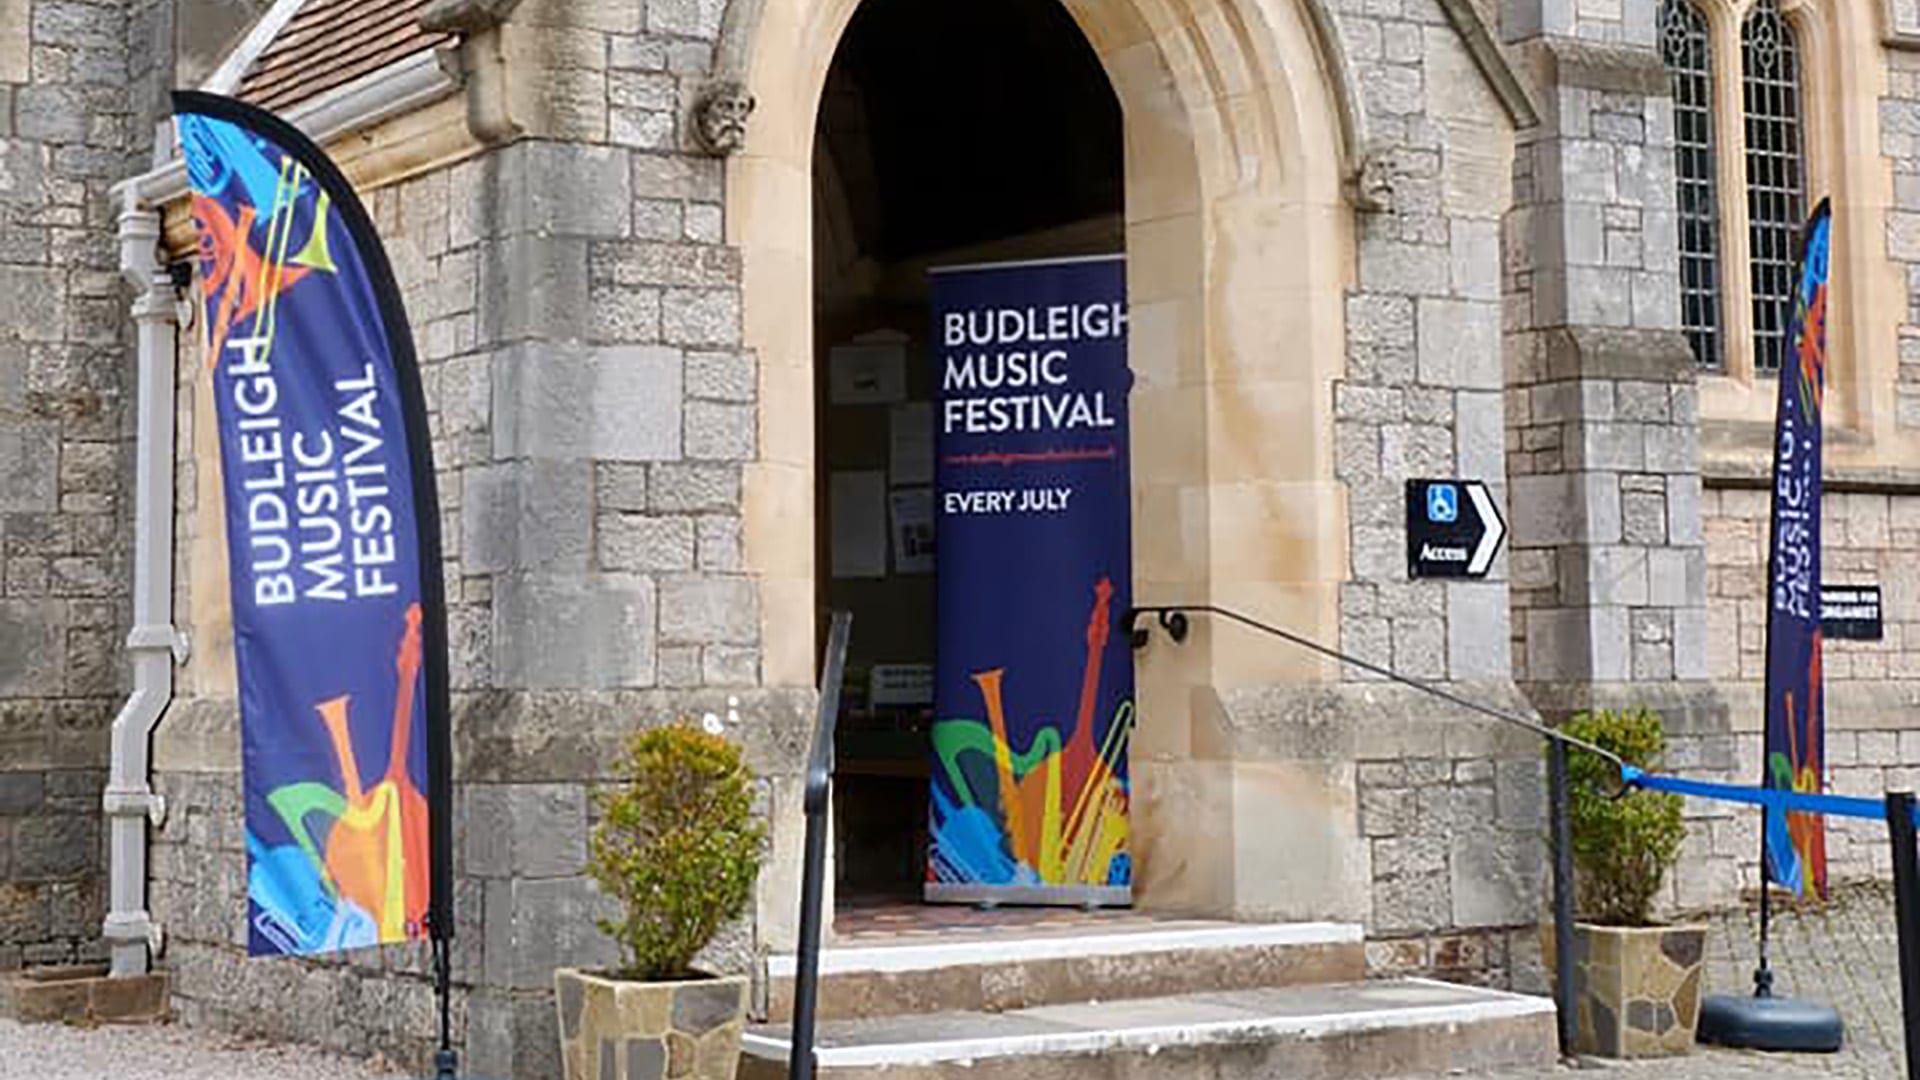 St Peter’s Church porch with Budleigh Music Festival signage.